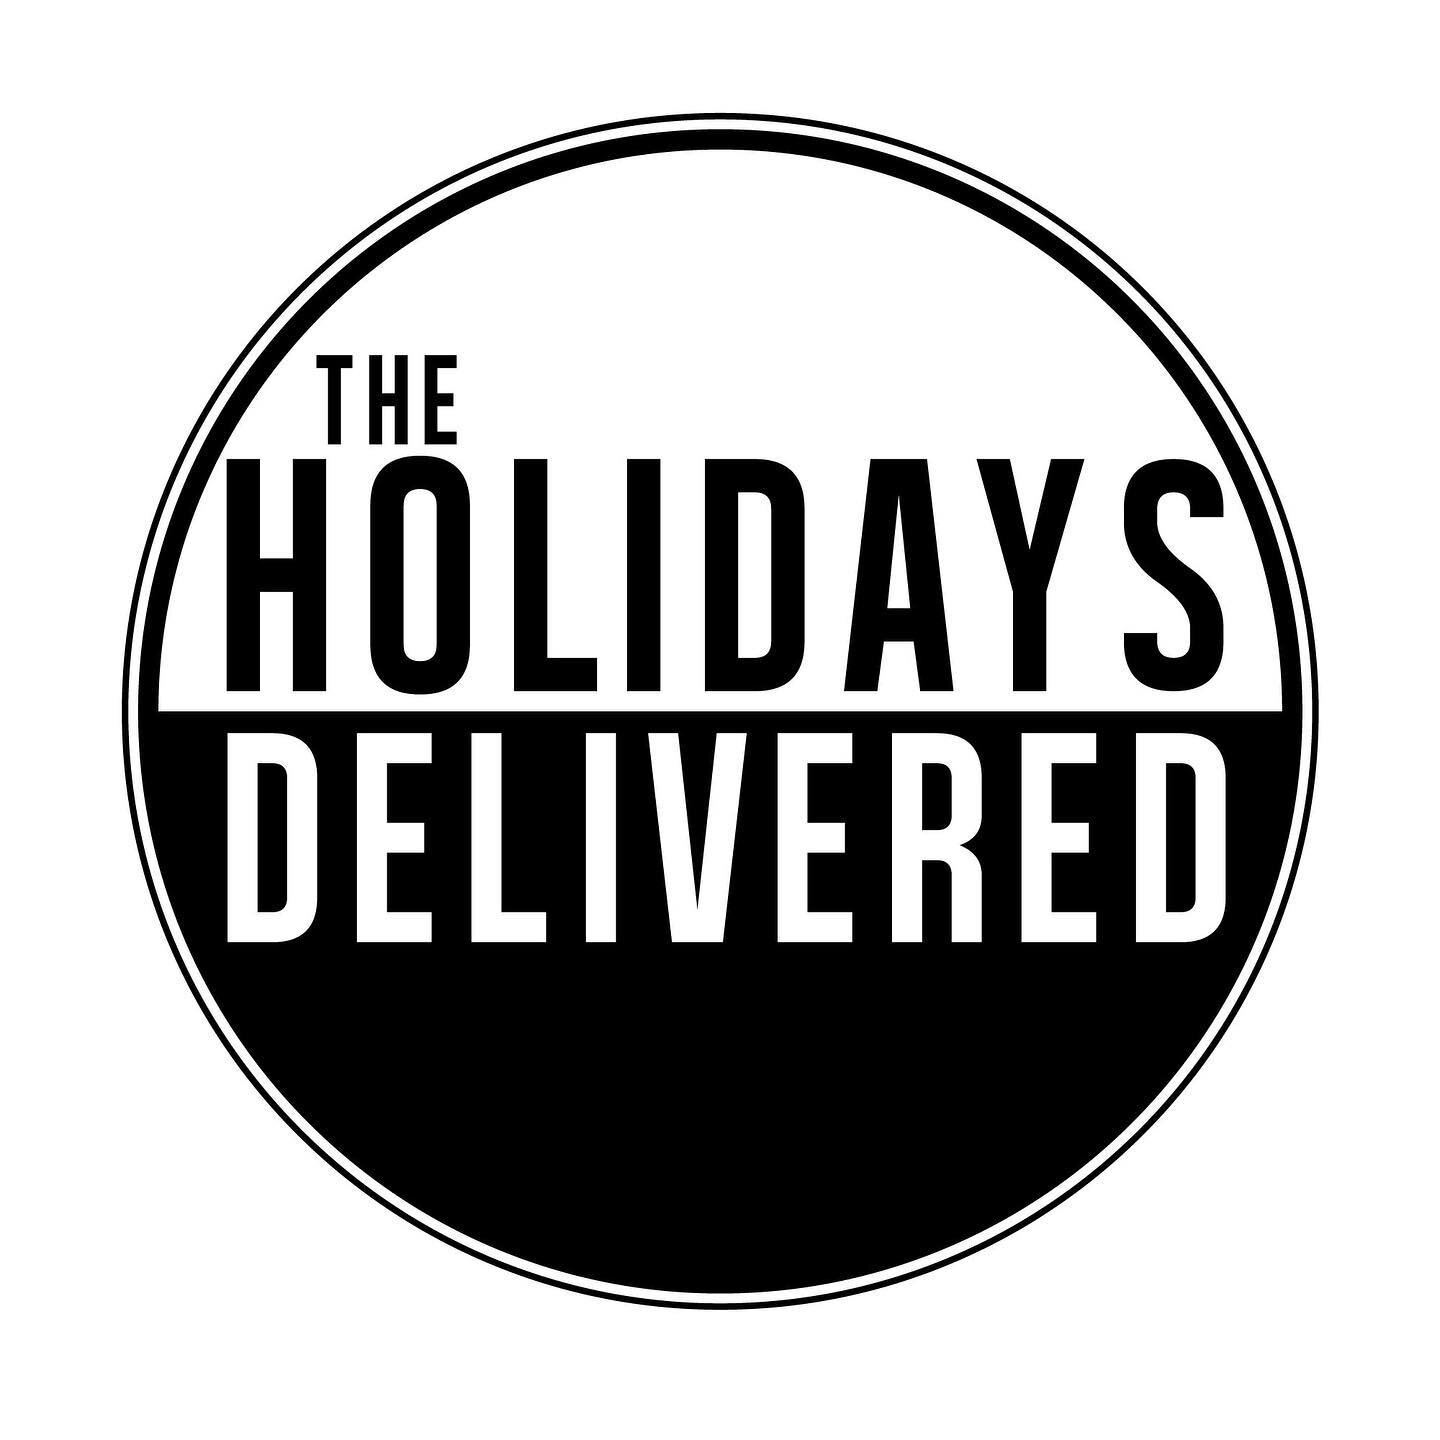 Exciting news!! 🎉🎉
We are in the process of finalizing our official delivery contract with Orange County State parks and will soon be an official delivery concession! We have created a new Instagram page @theholidays_delivered to share all the fun 